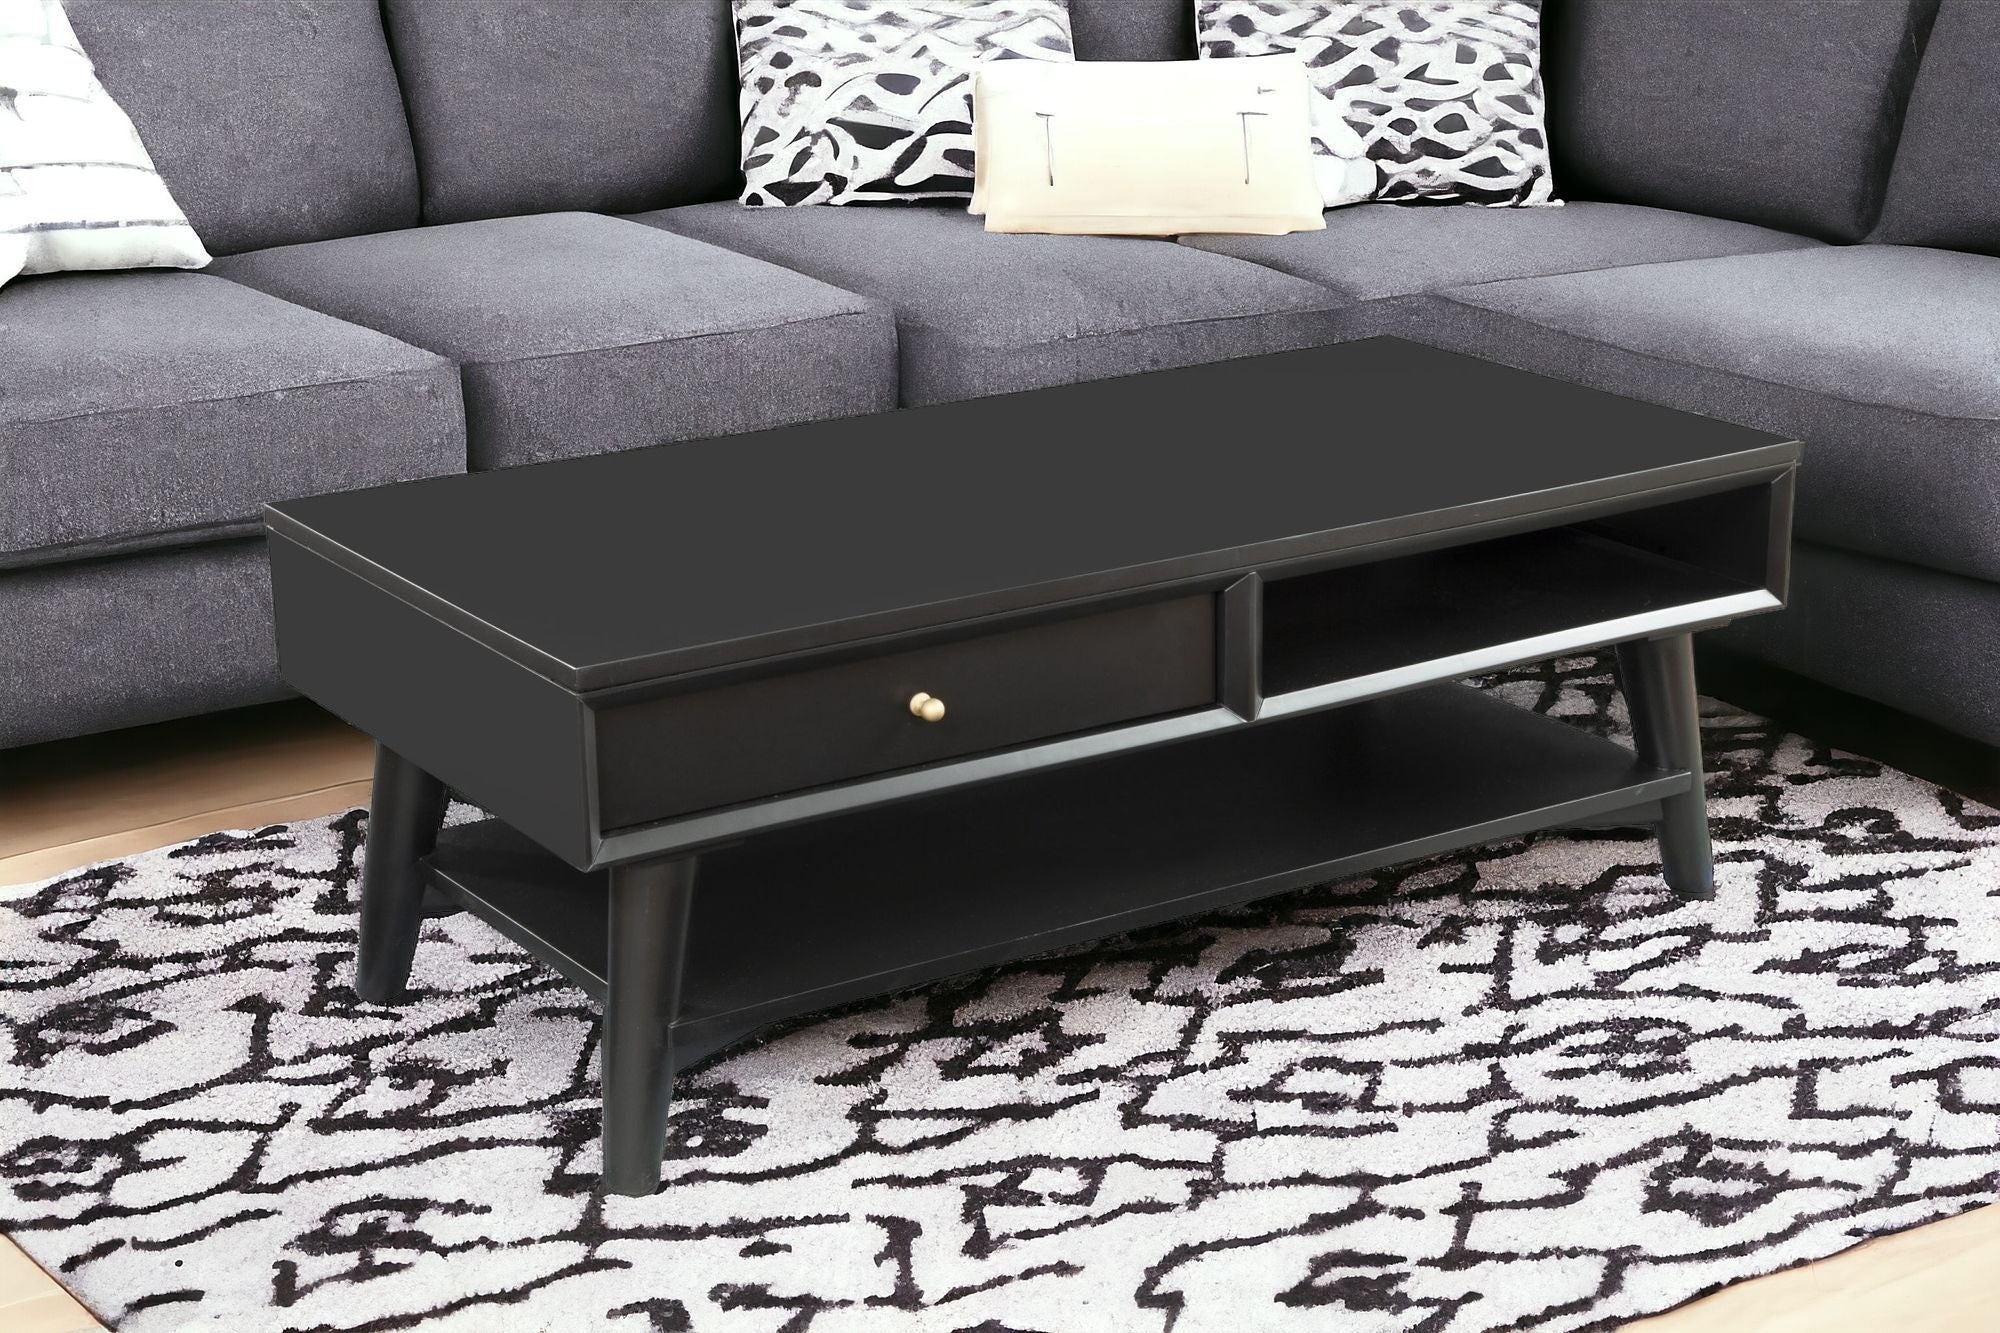 48" Black Solid And Manufactured Wood Coffee Table With Drawer